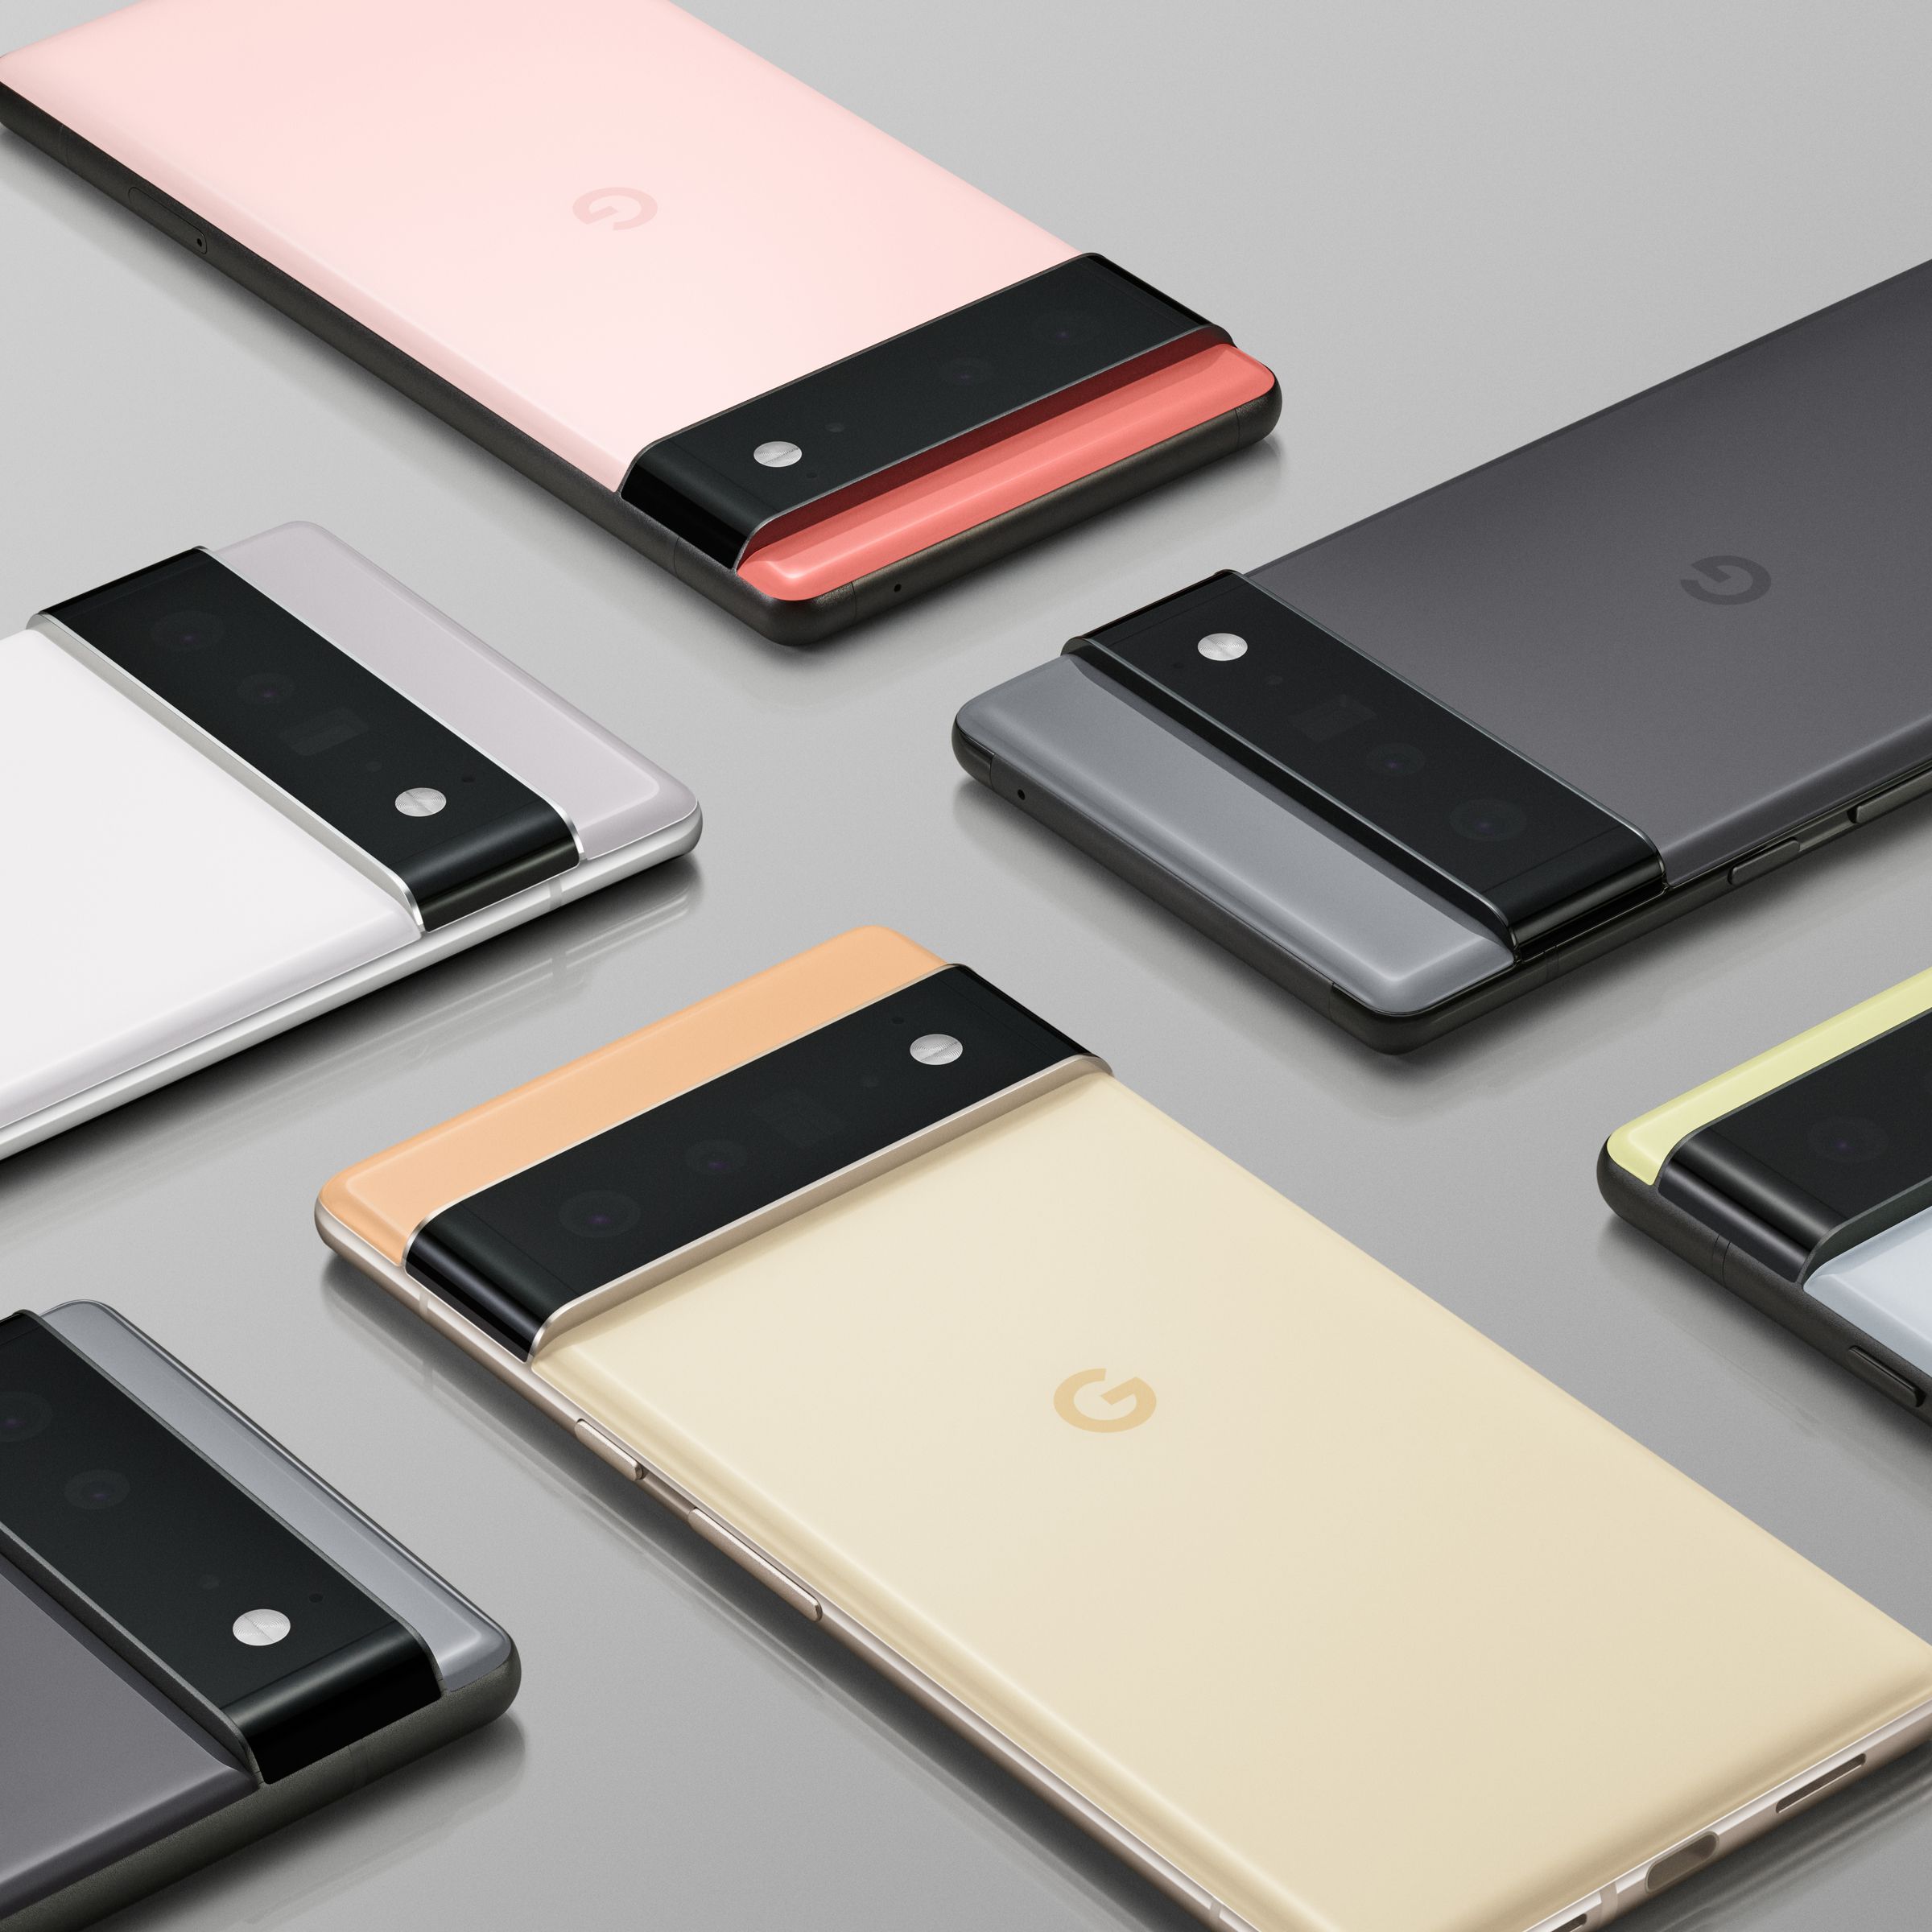 The Google Pixel 6 and 6 Pro lineup